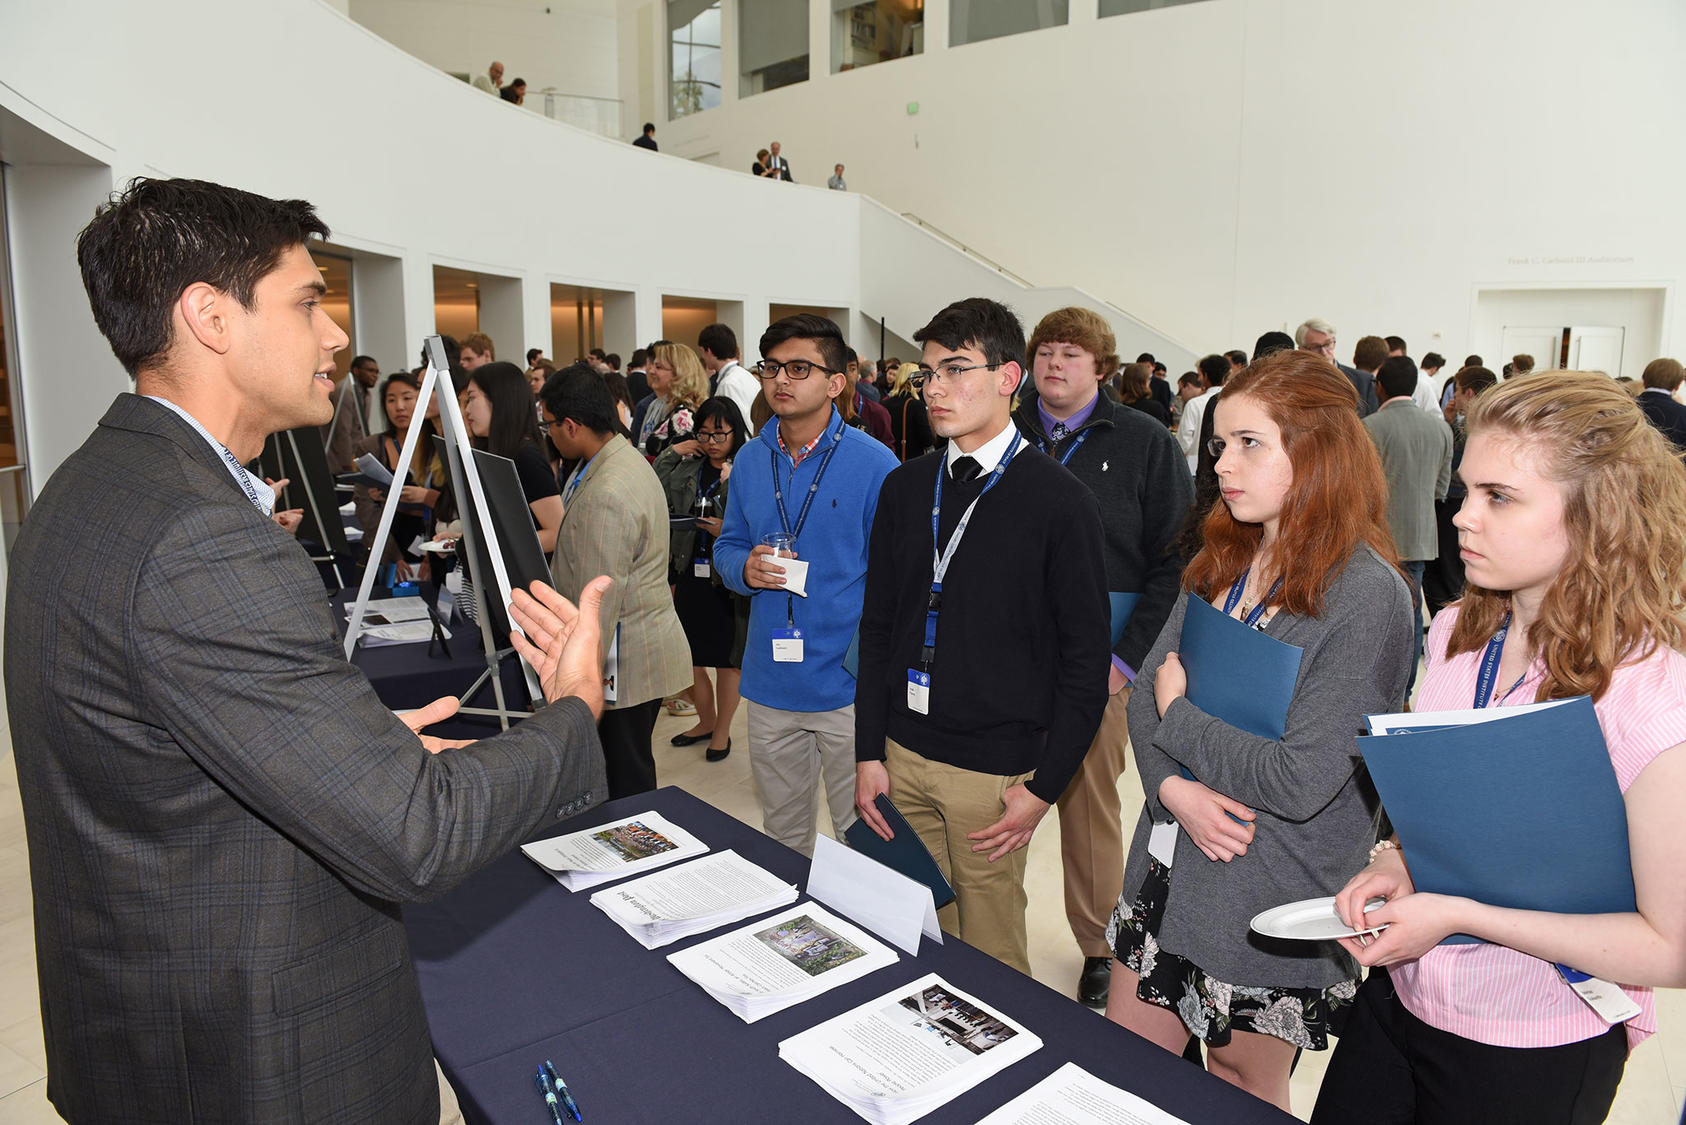 USIP staff engage with an audience of students, teachers, and parents from 25 U.S. states at the 2018 national competition reception for Academic WorldQuest, a program of the World Affairs Councils of America, which USIP sponsors.